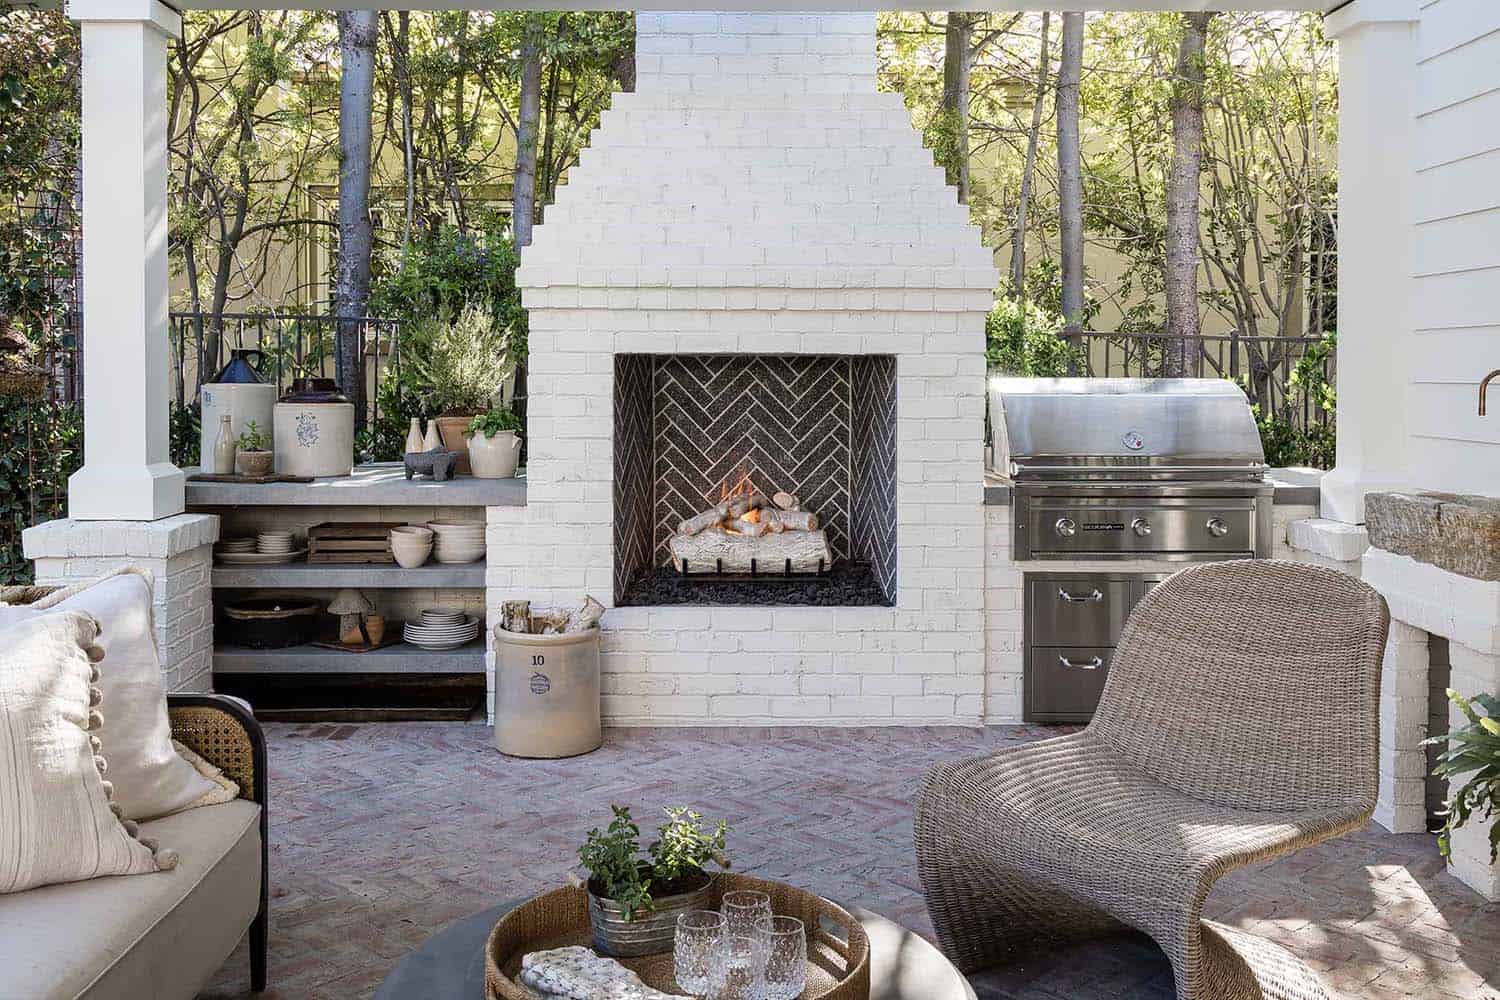 traditional style home exterior backyard with a fireplace and outdoor furniture